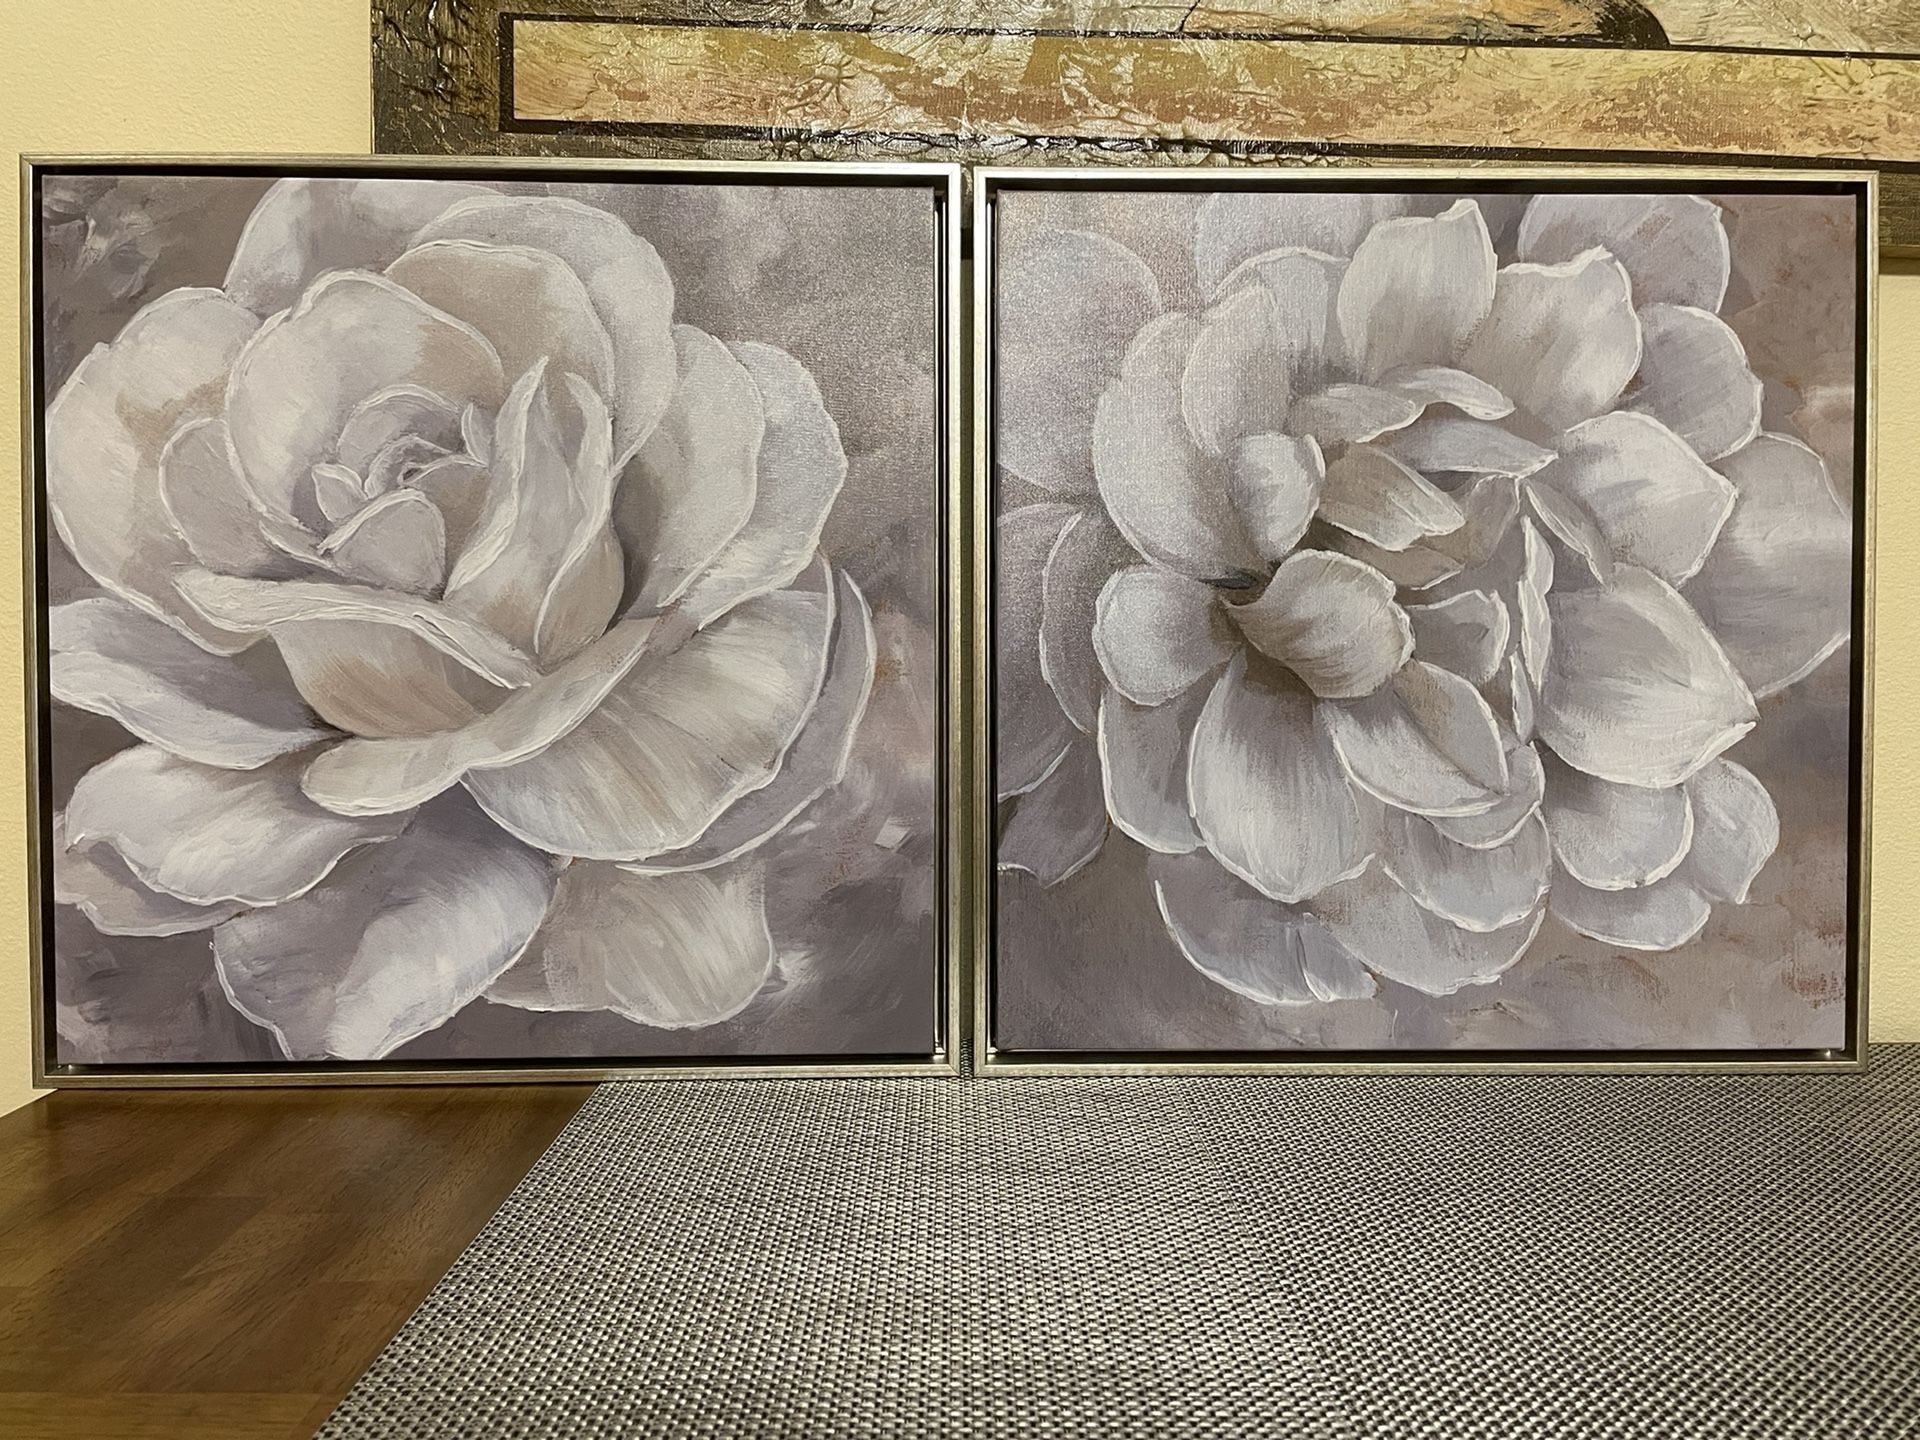 Flower Canvas Paintings Enclosed In Border Detailed Wooden FramecrOf 2 I